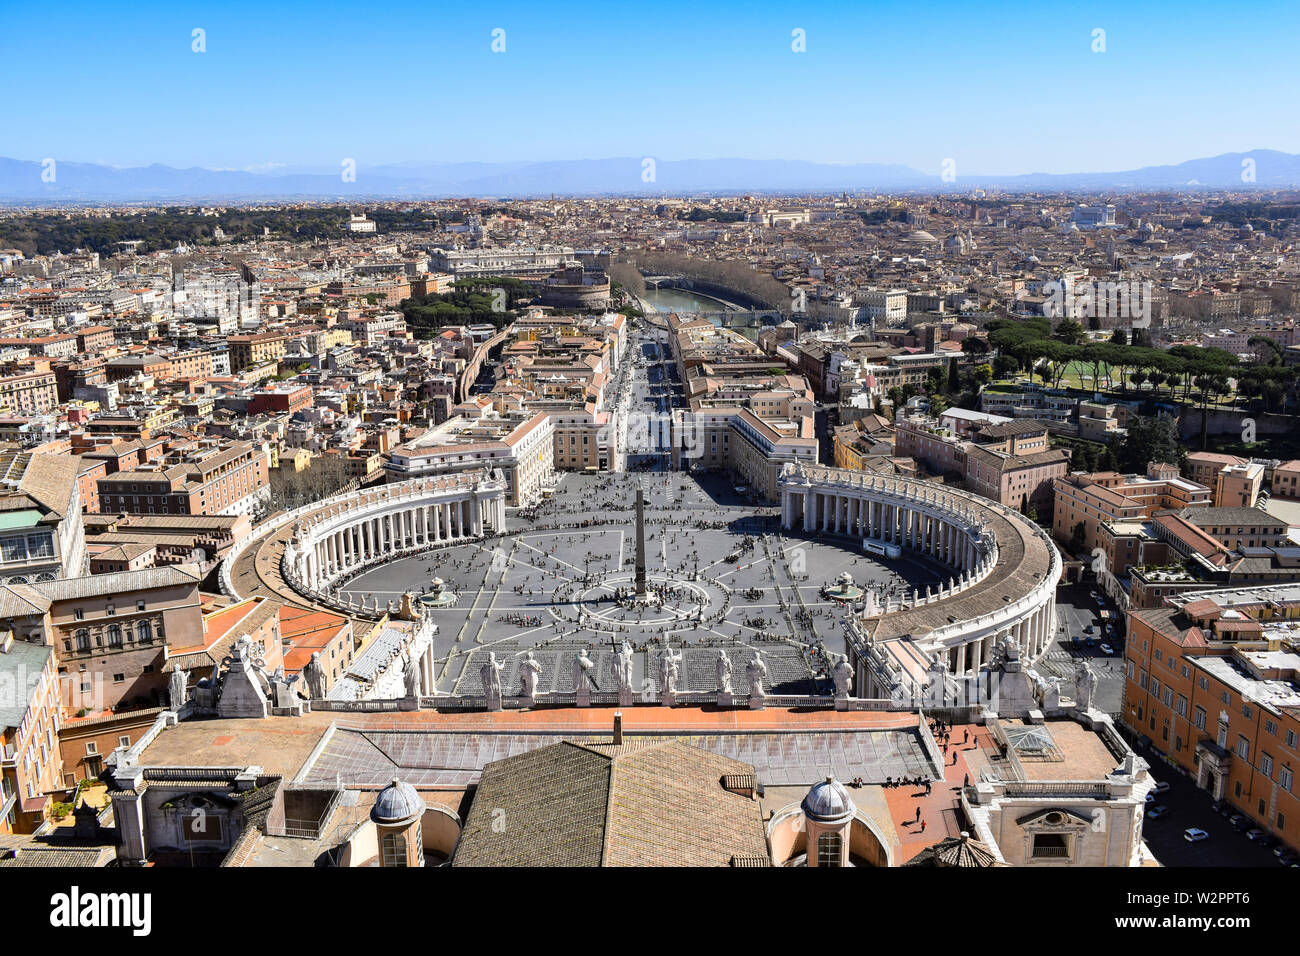 View from the top of St. Peter's Basilica dome overlooking St. Peter's Square Stock Photo